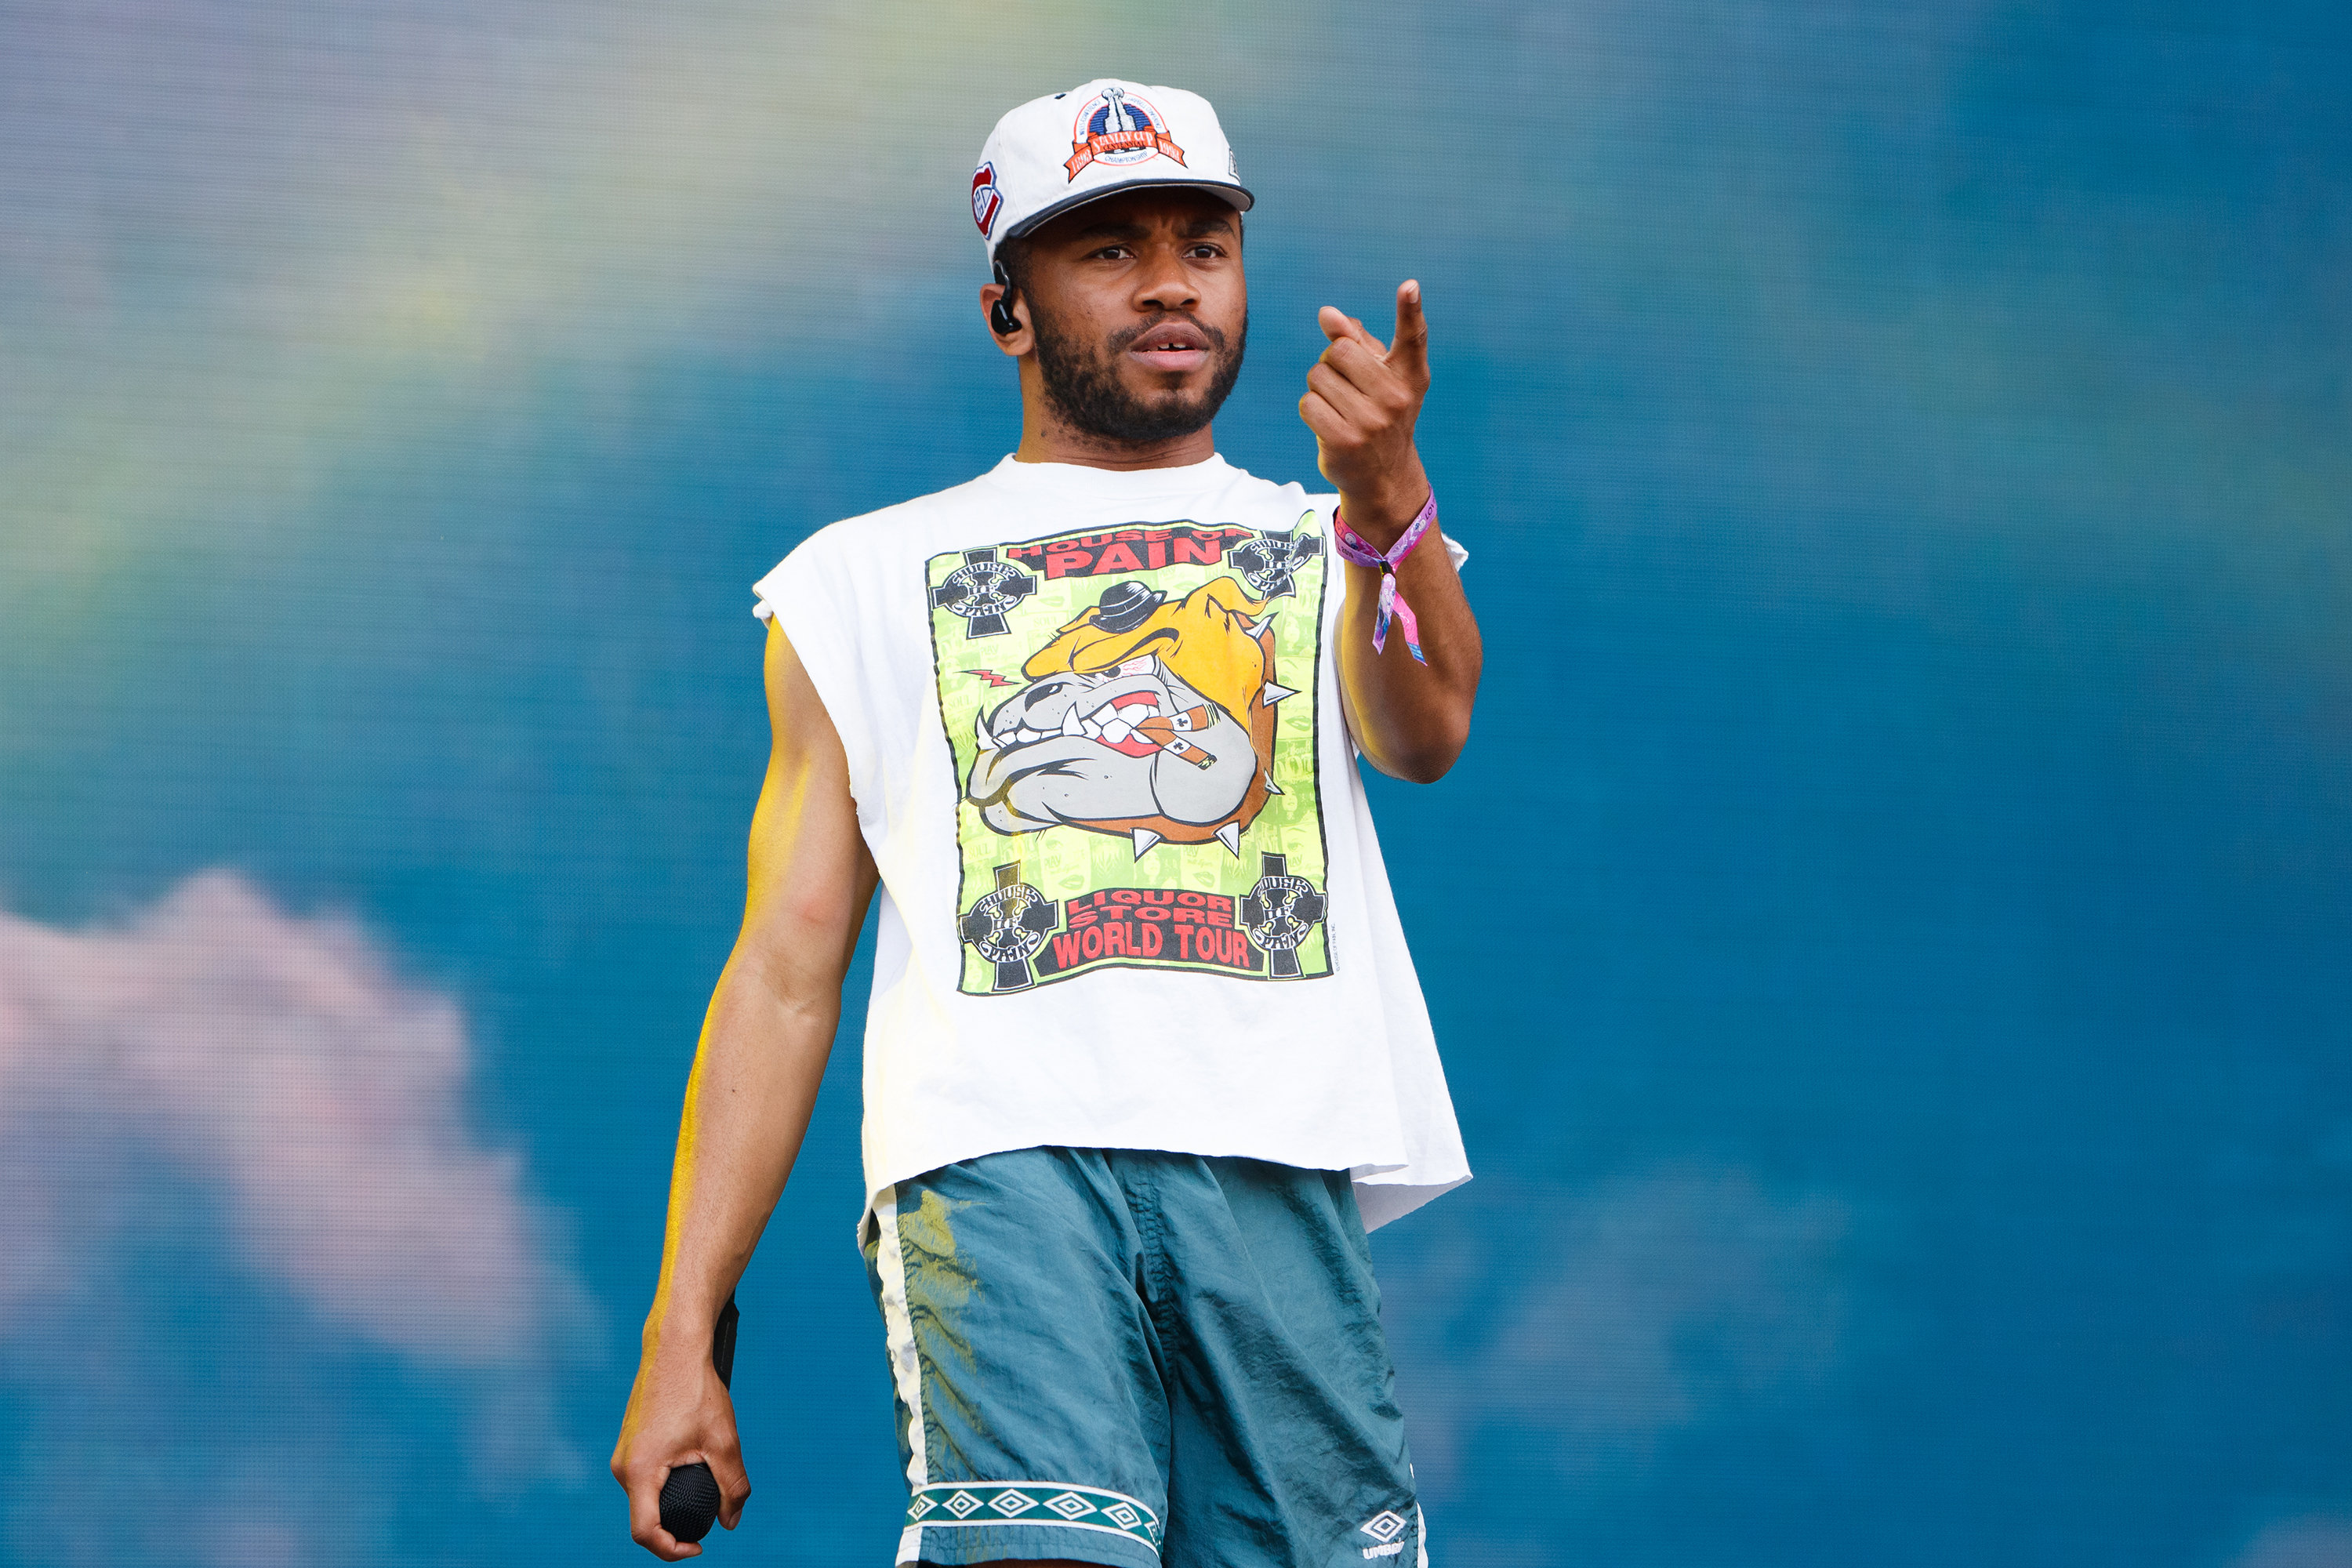 Watch Kevin Abstract's 10-Hour Treadmill Livestream